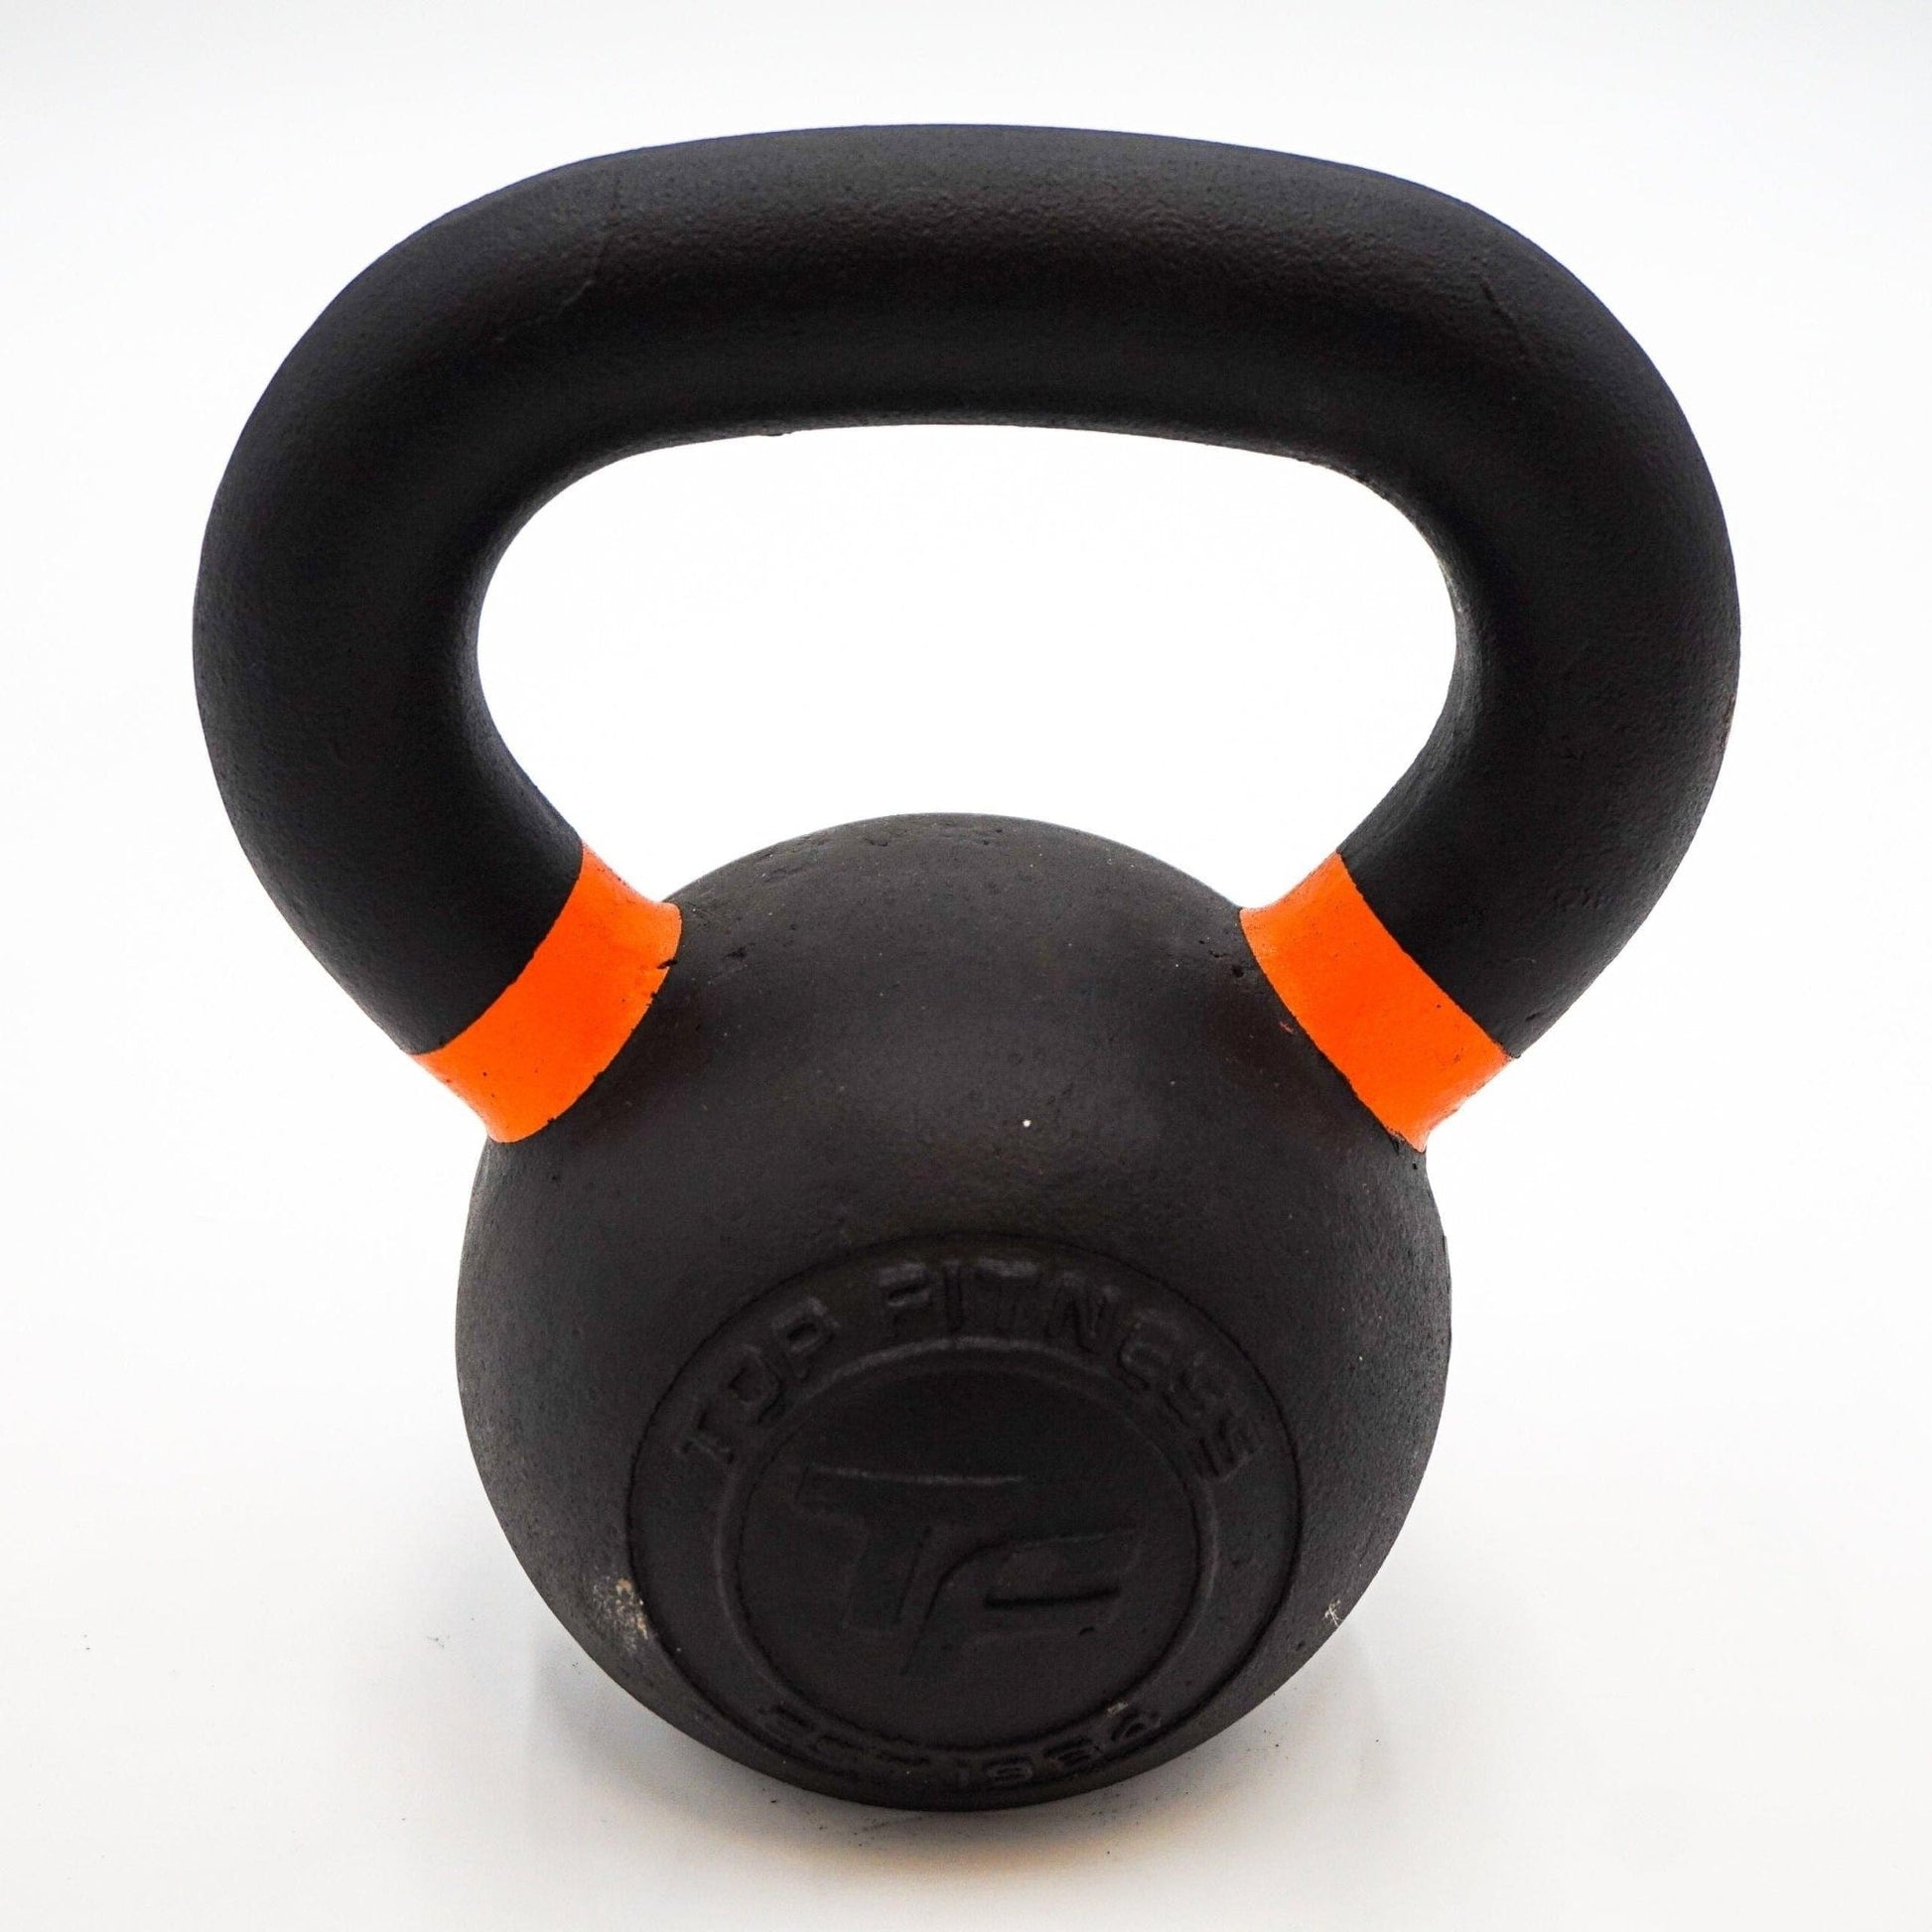 Top Fitness Cast Iron Kettlebell (Color-Coded) Kettlebells Top Fitness 22LB - ORANGE